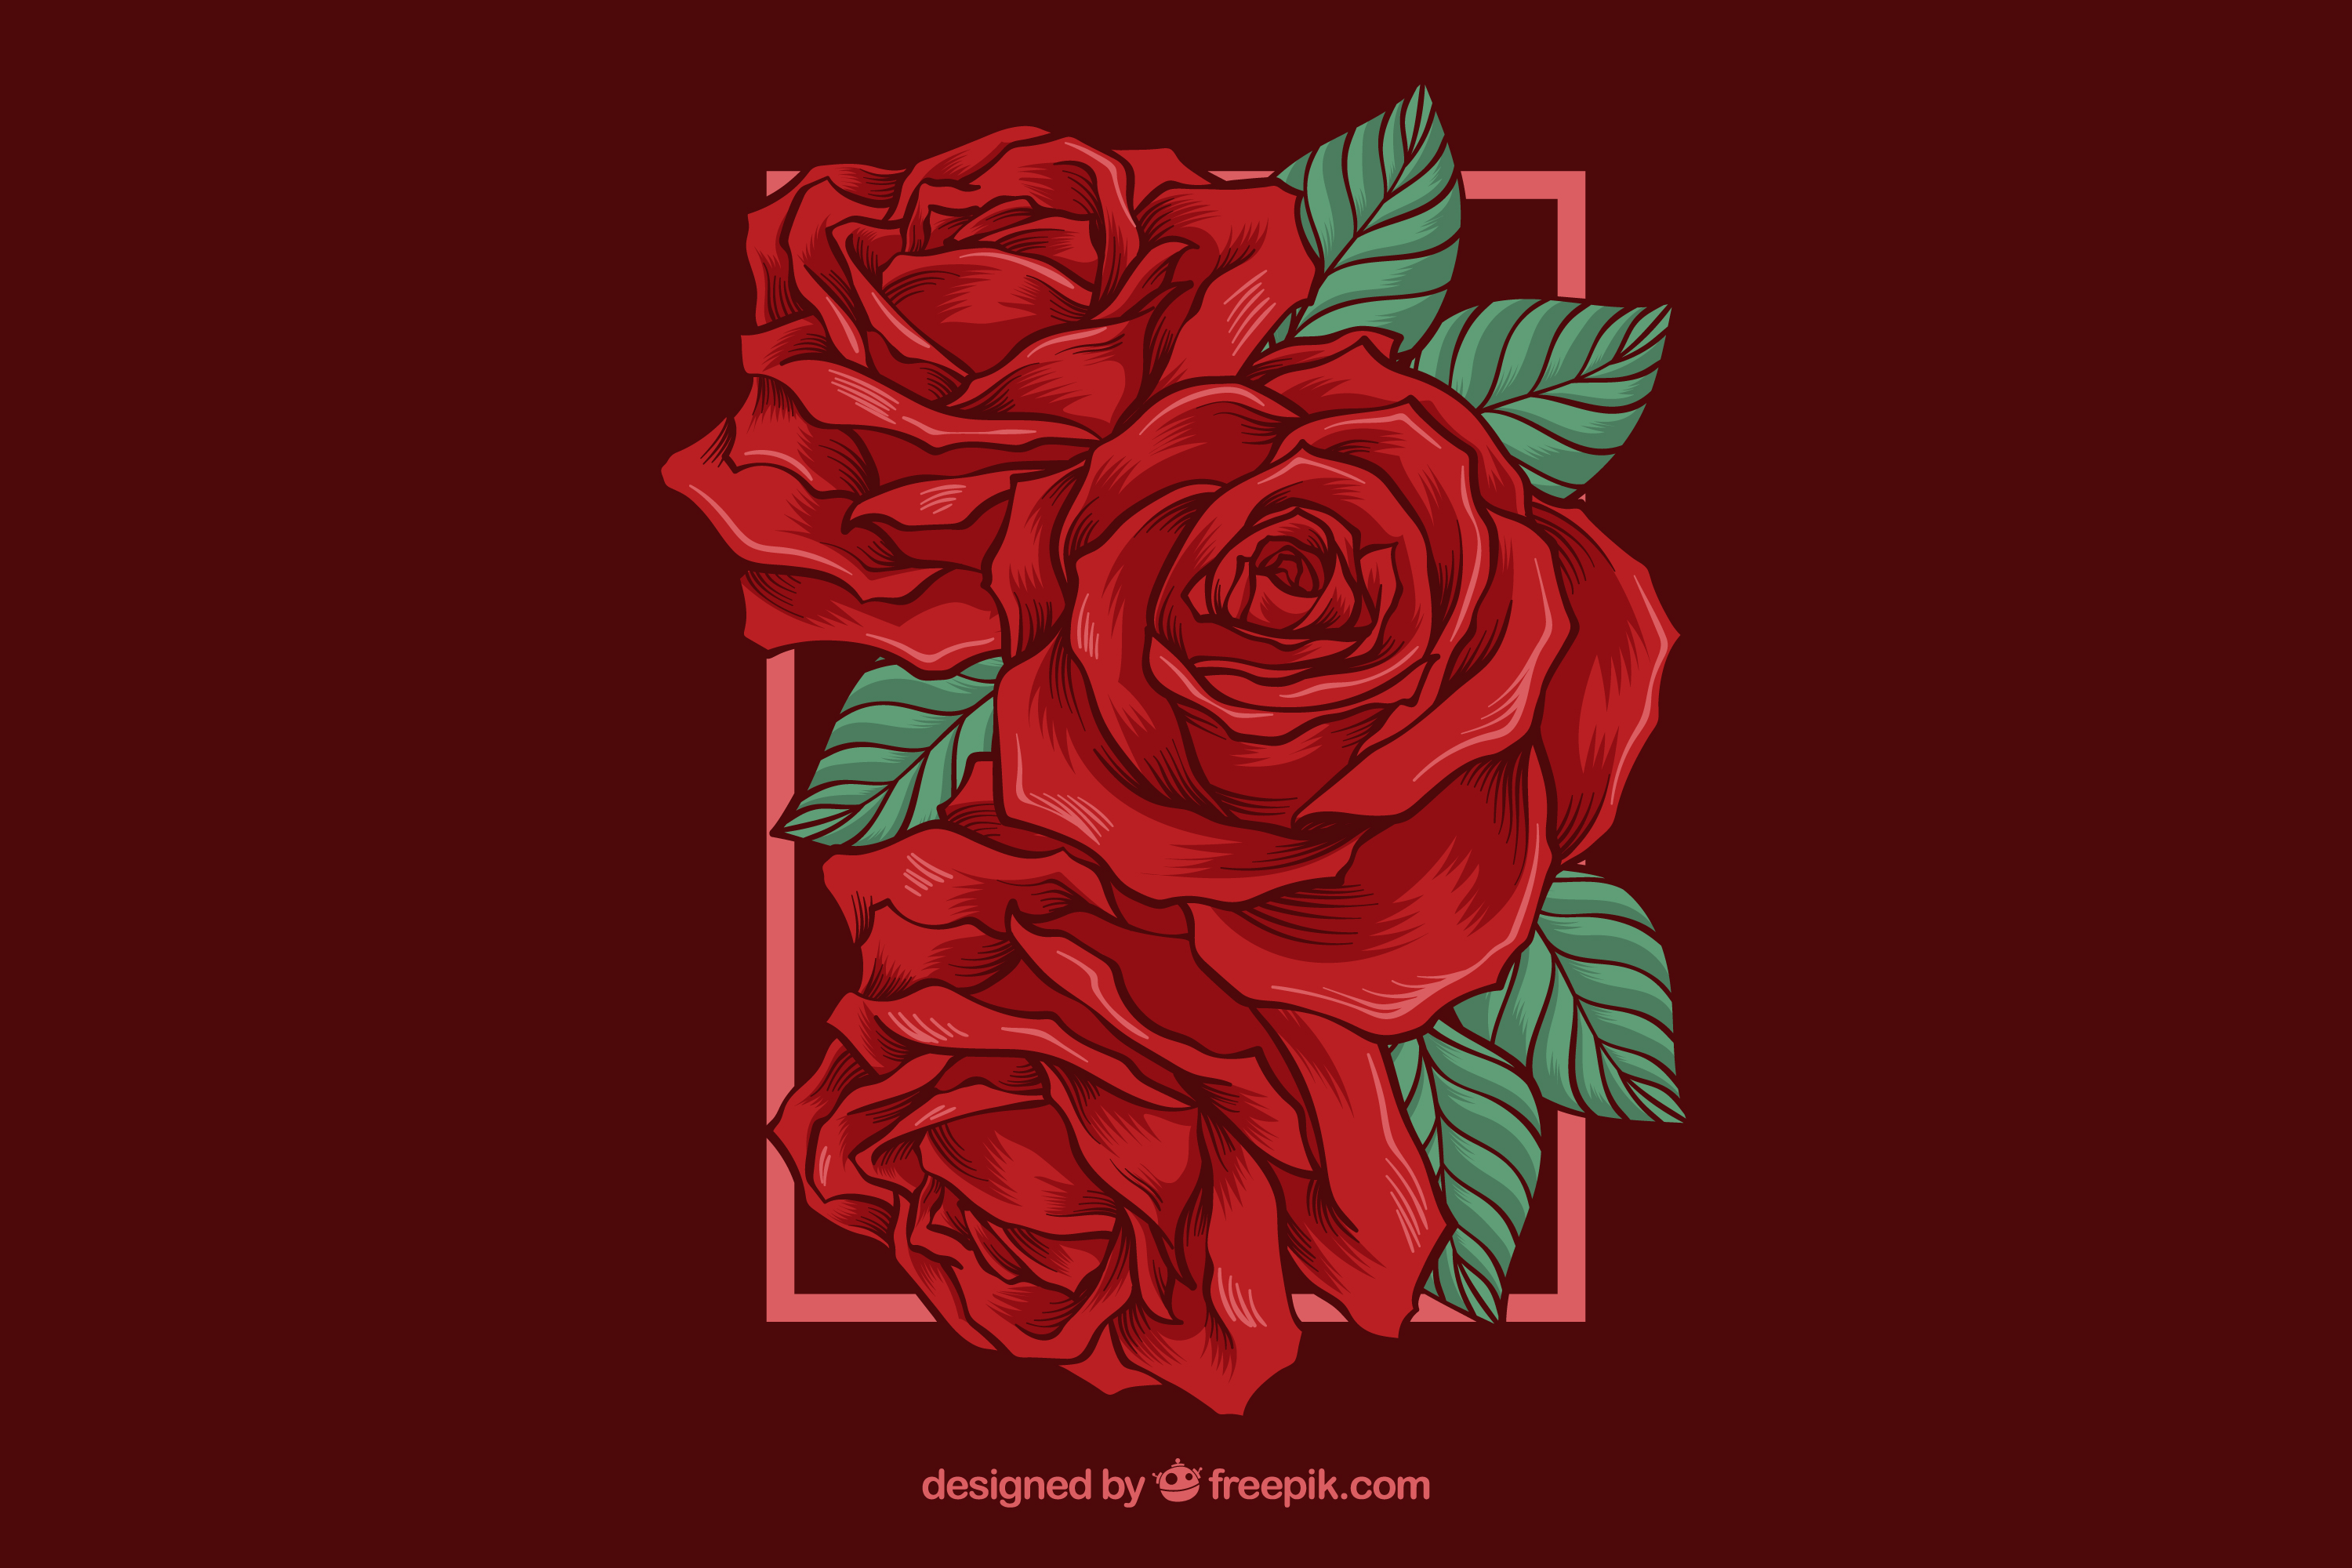 Roses Free Vector Graphics | Everypixel